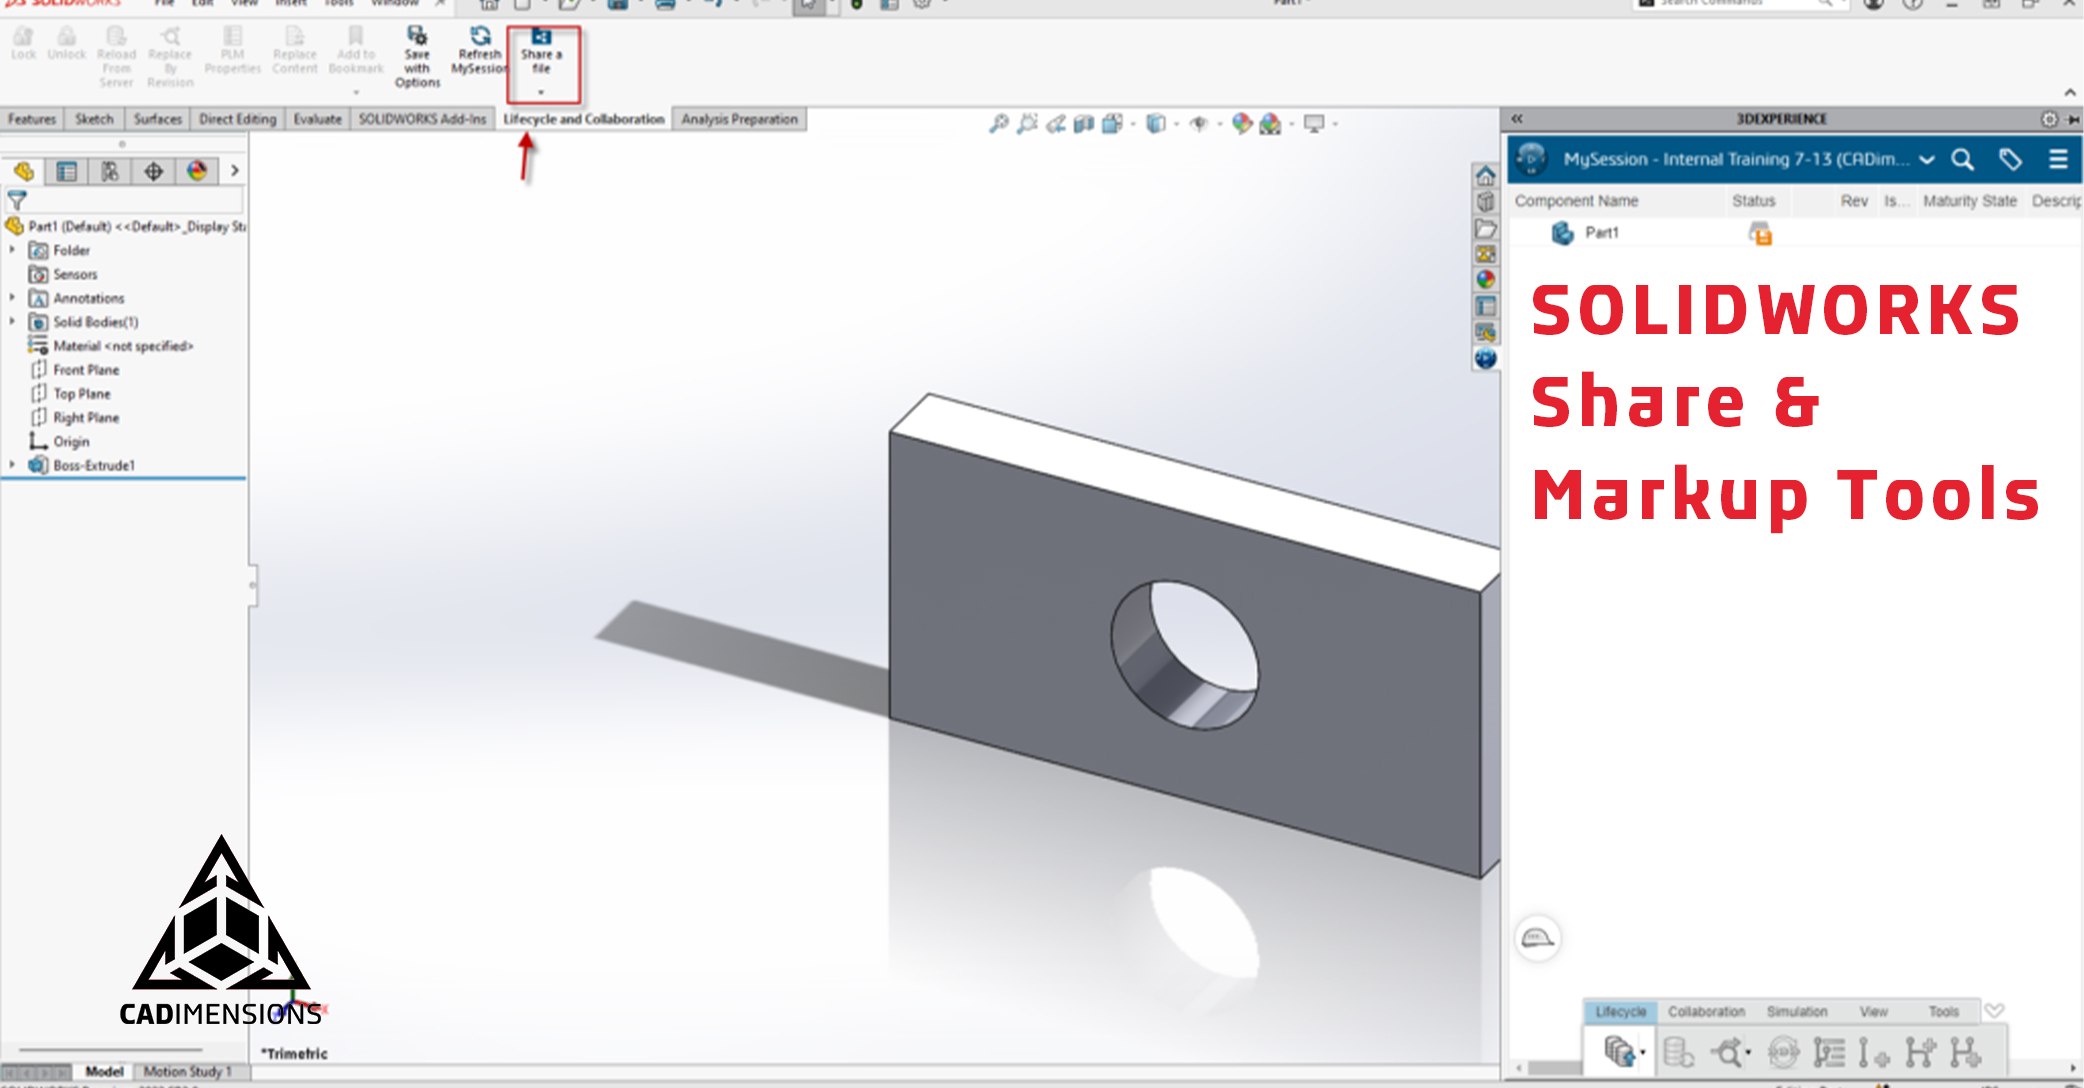 Getting Started with SOLIDWORKS Share and Markup Tools